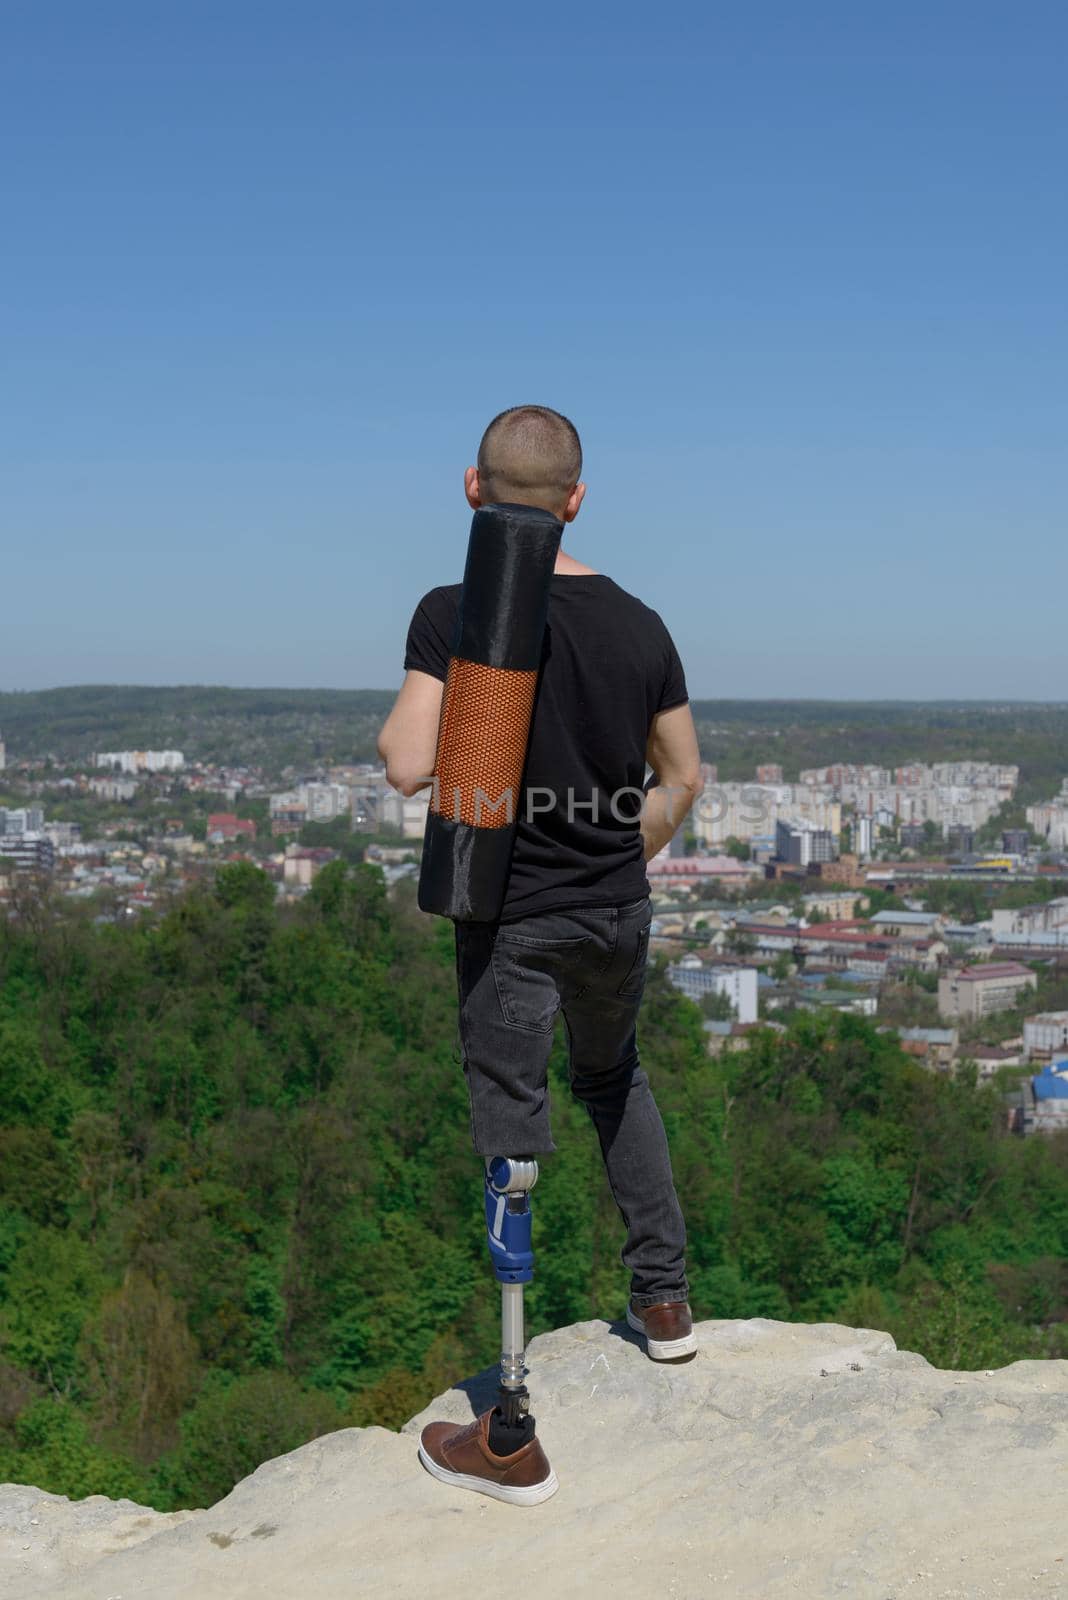 a man on a prosthetic leg travels the mountains. Dressed in black jeans and a T-shirt, he carrying mat by Ashtray25